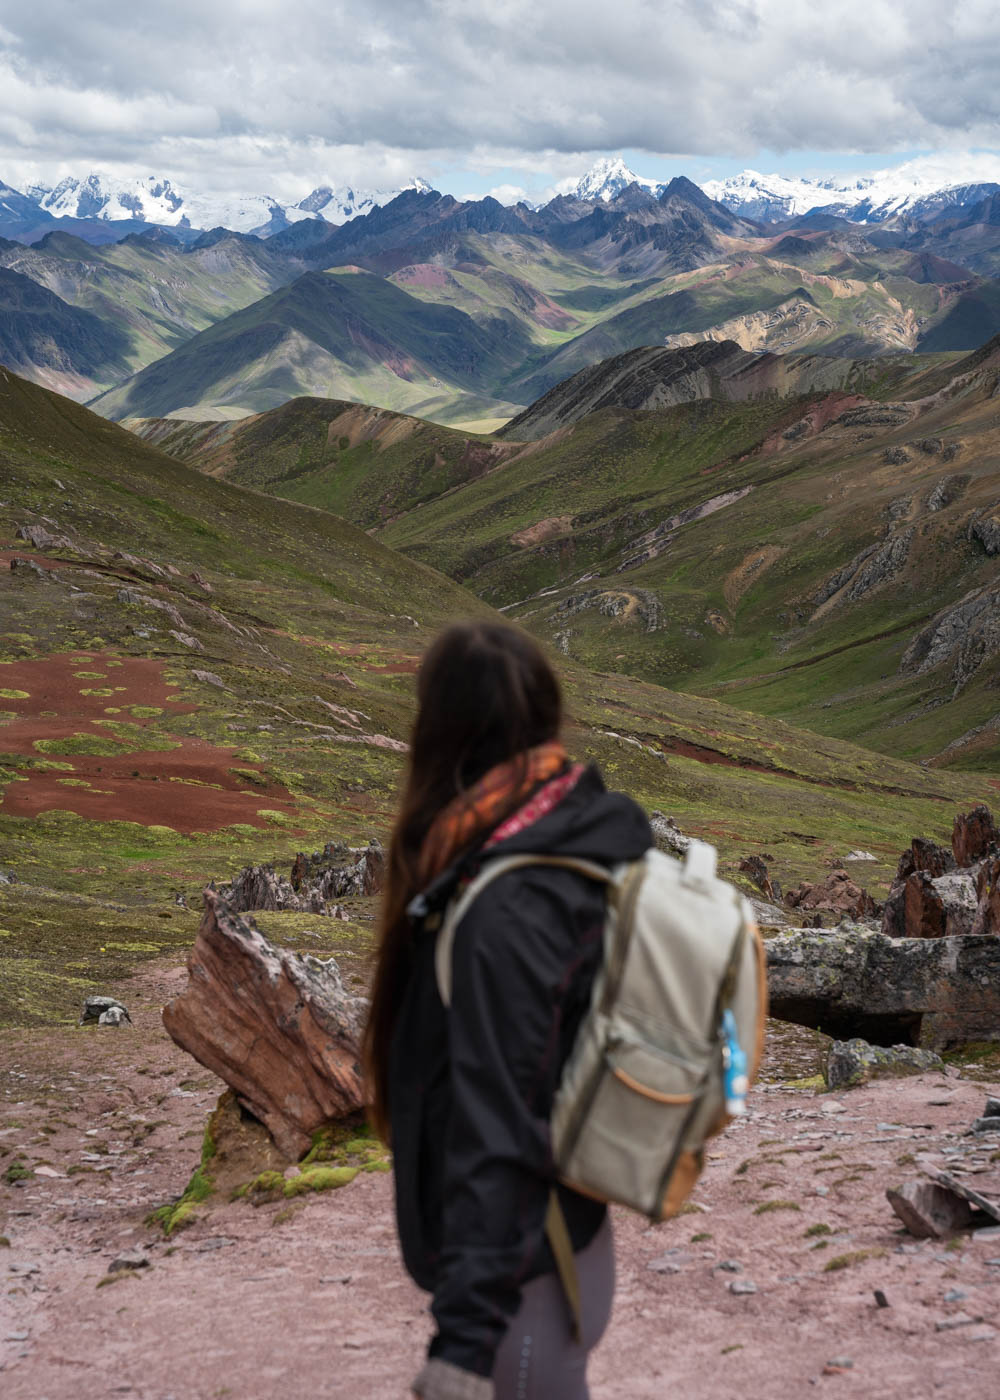 Sara in a raincoat and backpack overlooking a view of the Andes mountain range with snow-capped mountains in the distance.